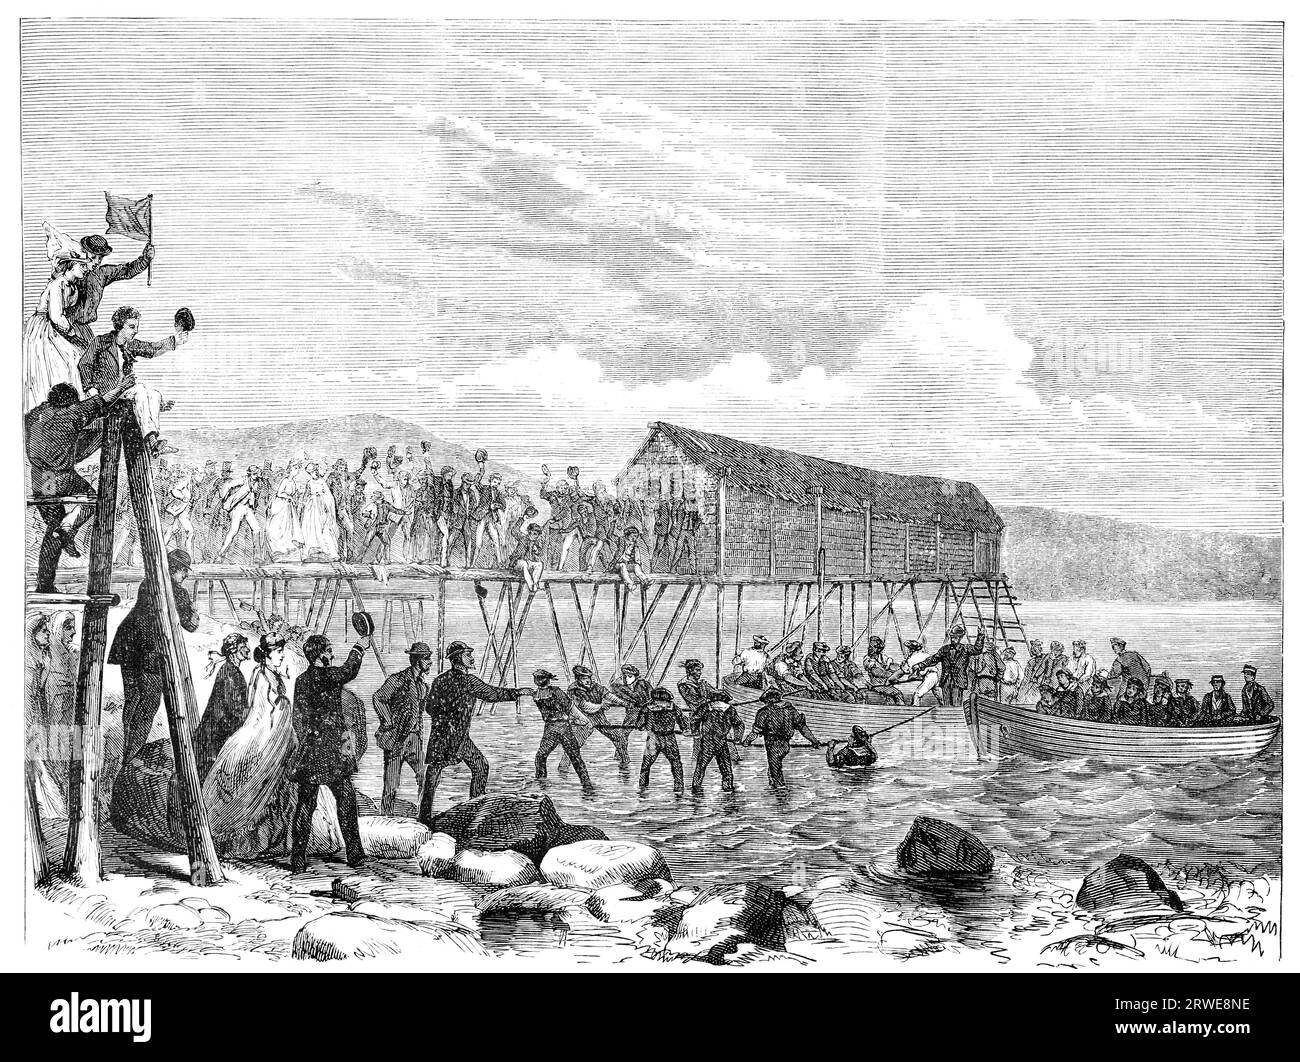 Transatlantic telegraph cable arriving at Hearts Content, Newfoundland, USA. Engraving by unknown artist from Ny Illustrerad Tidning 1866 Stock Photo